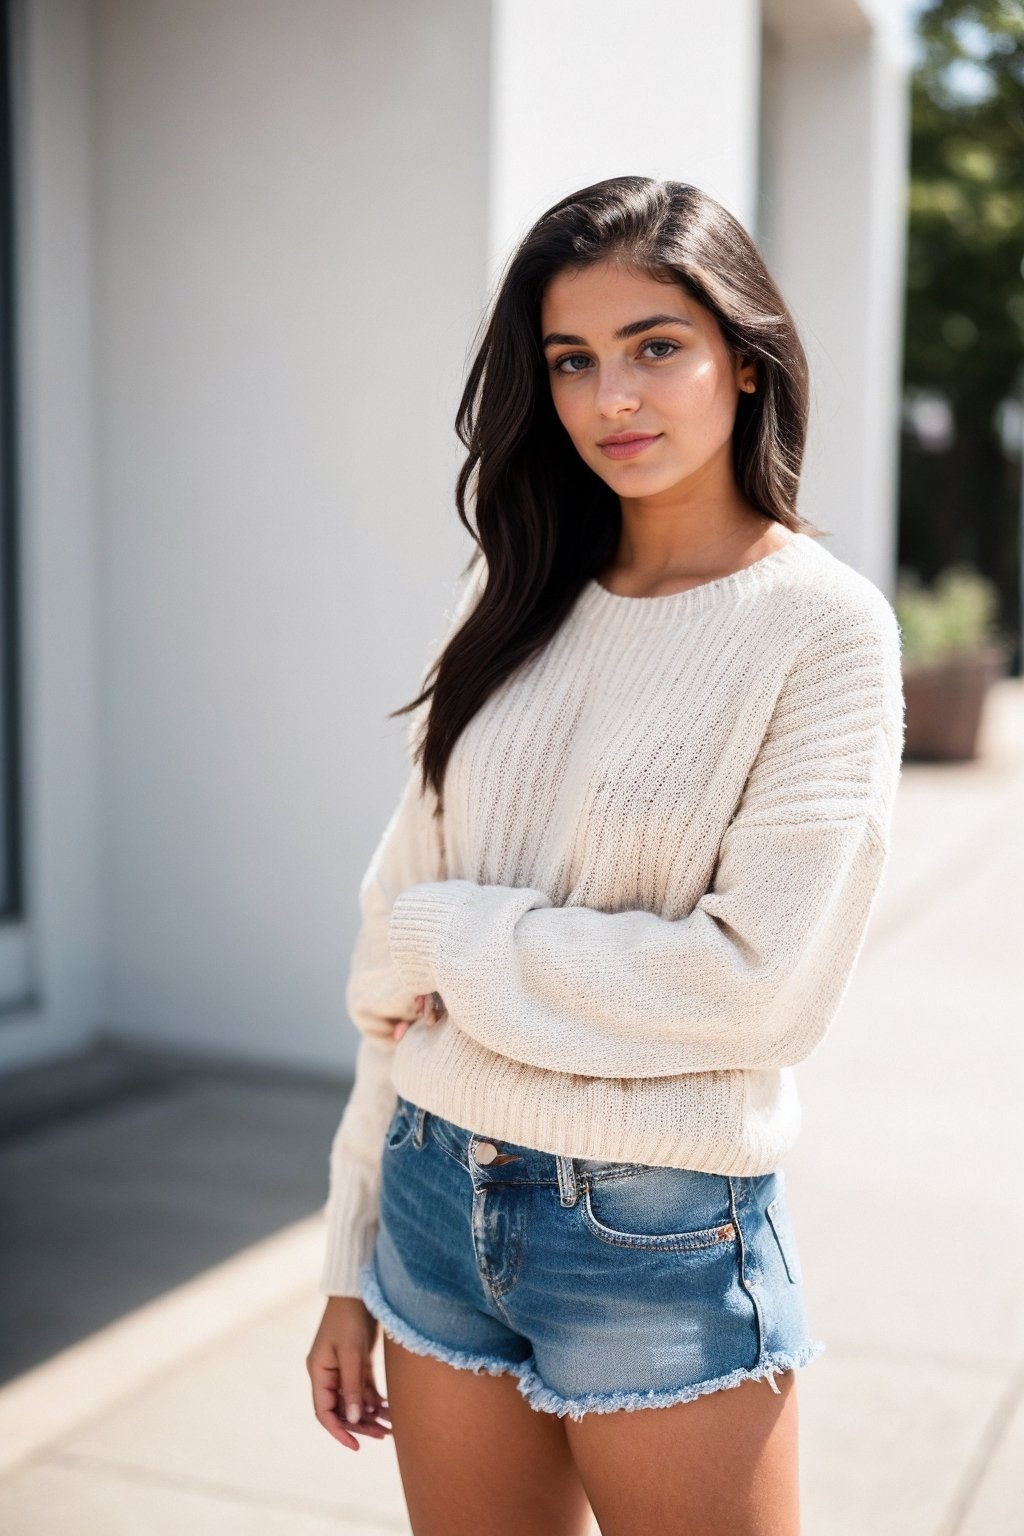 Sanya Foster, a 24-year-old Indian Canadian girl, stands confidently against a crisp white backdrop, donning a simple yet chic sweater paired with denim shorts and pristine white sneakers. Her dark hair cascades down her shoulders, framing her serene yet determined expression. The sunlight gently illuminates her features, highlighting her natural beauty and grace. Photography, using a Canon EOS 5D Mark IV with a 50mm prime lens, capturing the soft natural light and subtle details of Sanya's attire and demeanor